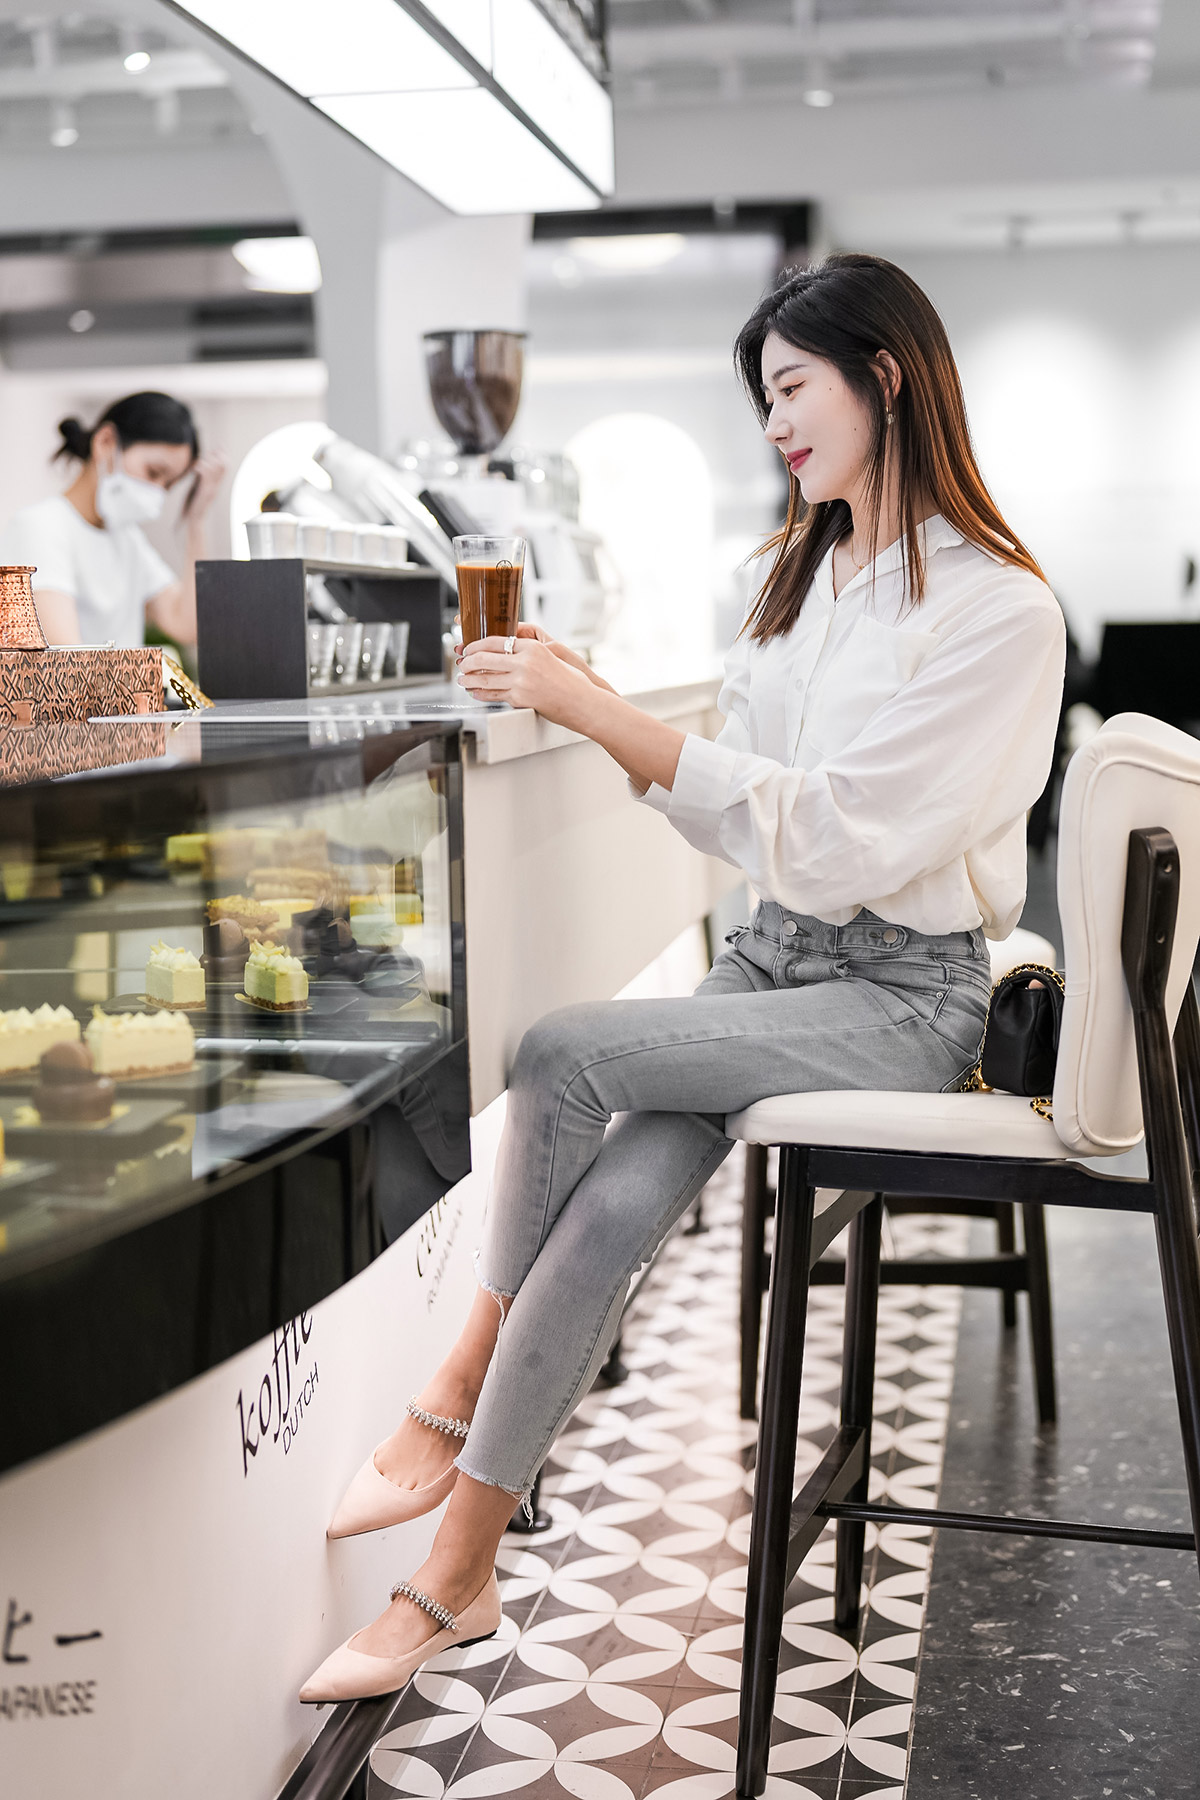 In particular, cups of coffee have distinctive flavors created from the Vietnamese coffee cultural heritage such as Vietnamese traditional filter coffee, globally famous Vietnamese iced milk coffee, and Vietnamese egg coffee,… which are the favorite choices of Chinese young people.